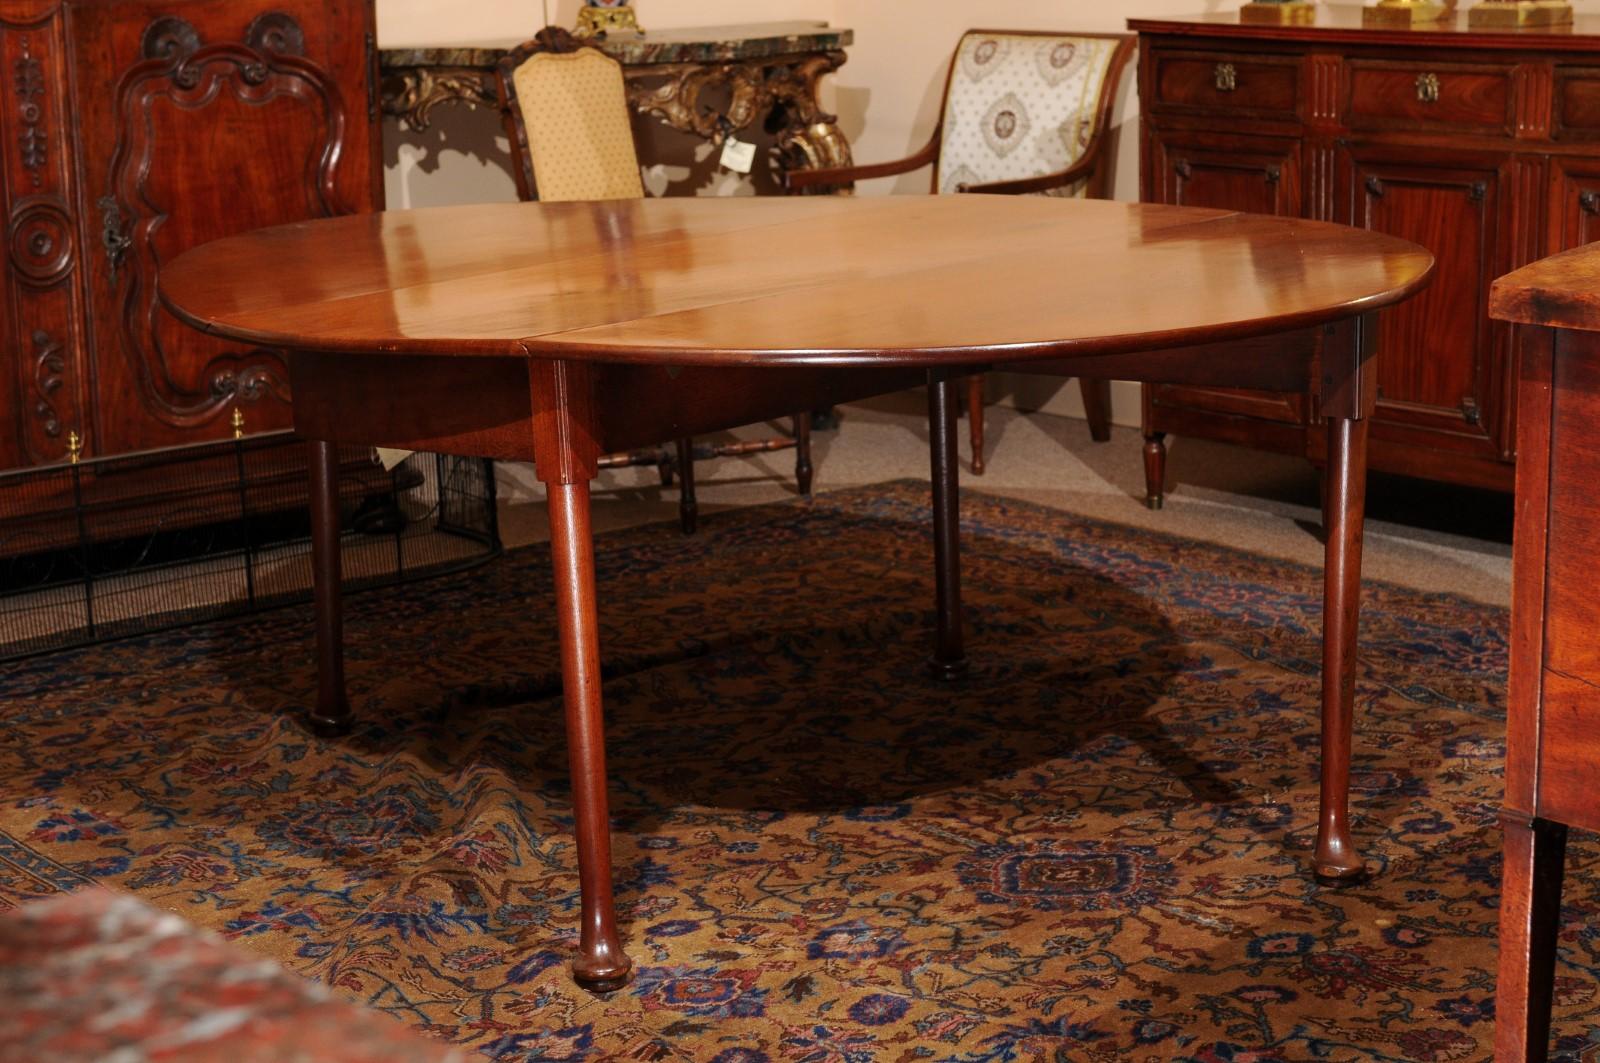  Mid-18th C English George II Mahogany Drop Leaf Oval Dining Table with Pad Feet In Good Condition For Sale In Atlanta, GA